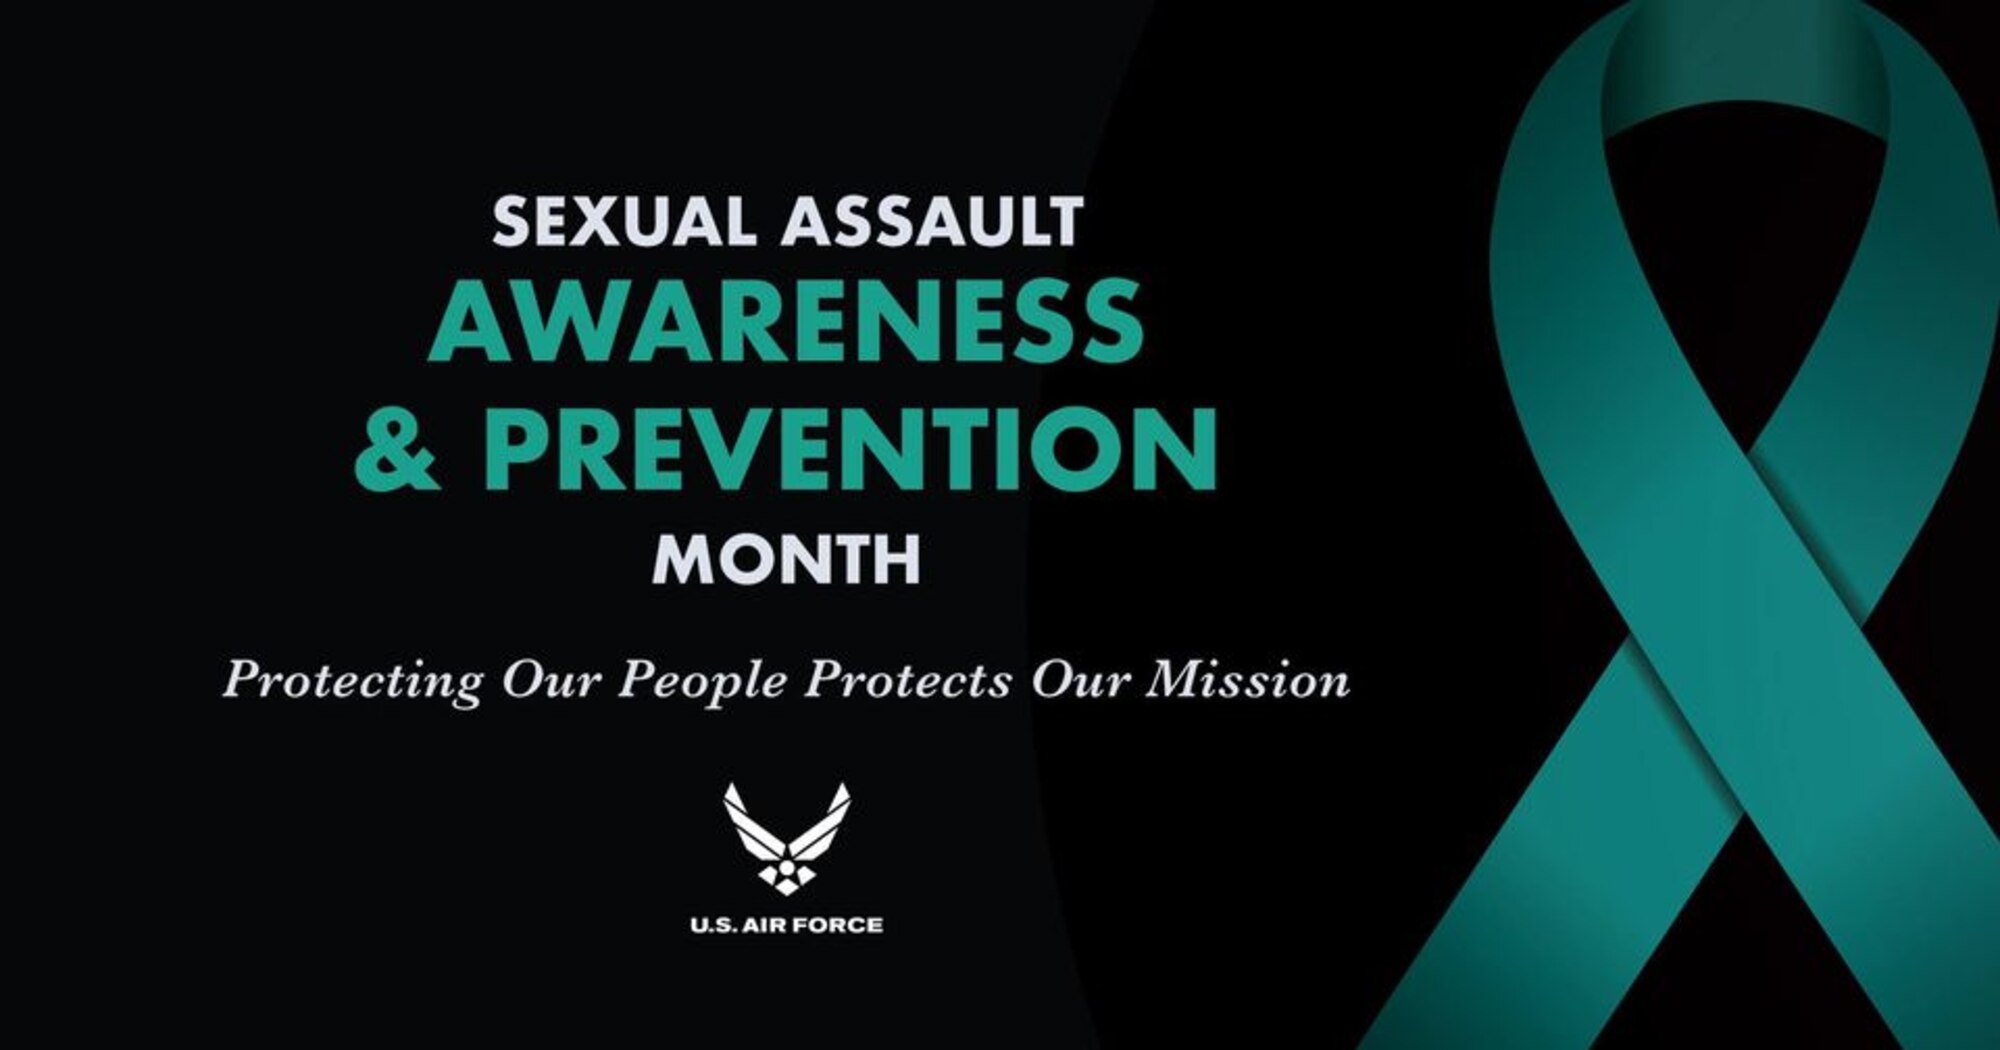 April is Sexual Assault Awareness and Prevention Month. We take time this month to raise awareness & provide resources to prevent sexual assault and harassment.